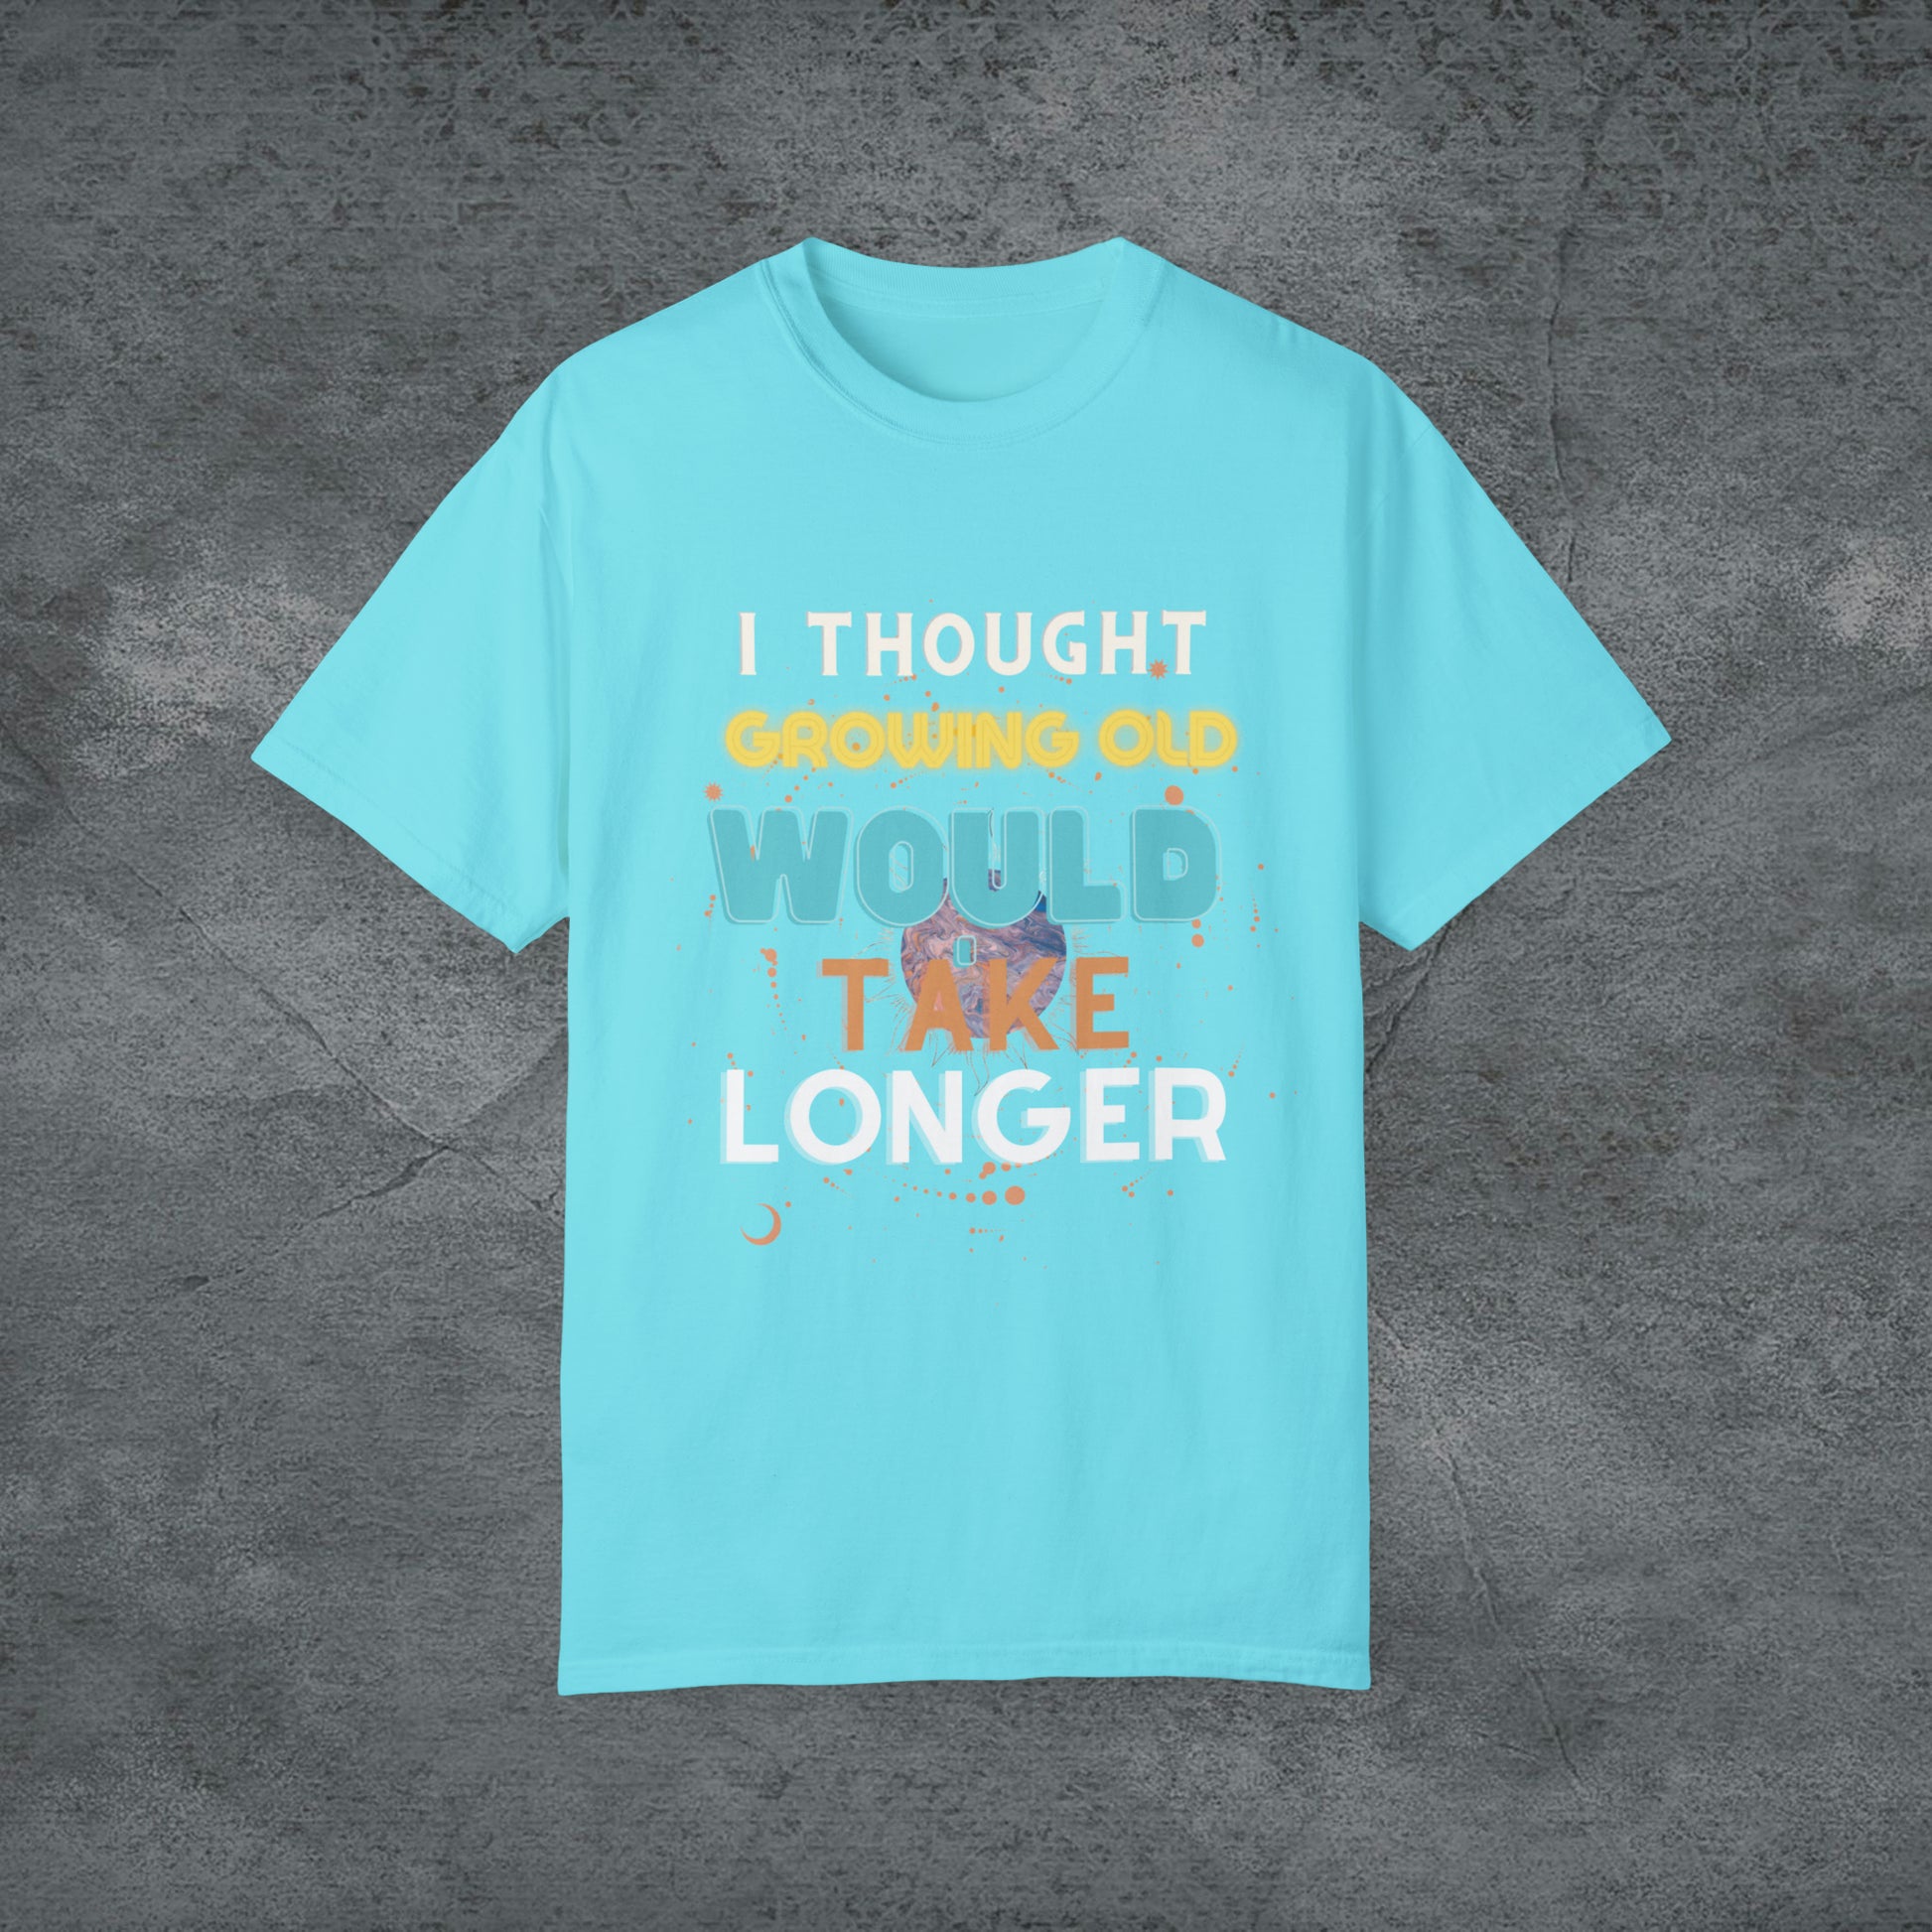 I Thought Growing Old Would Take Longer T-Shirt | Getting Older T Shirt | Funny Adulting T-Shirt | Old Age T Shirt | Old Person T Shirt T-Shirt Lagoon Blue S 